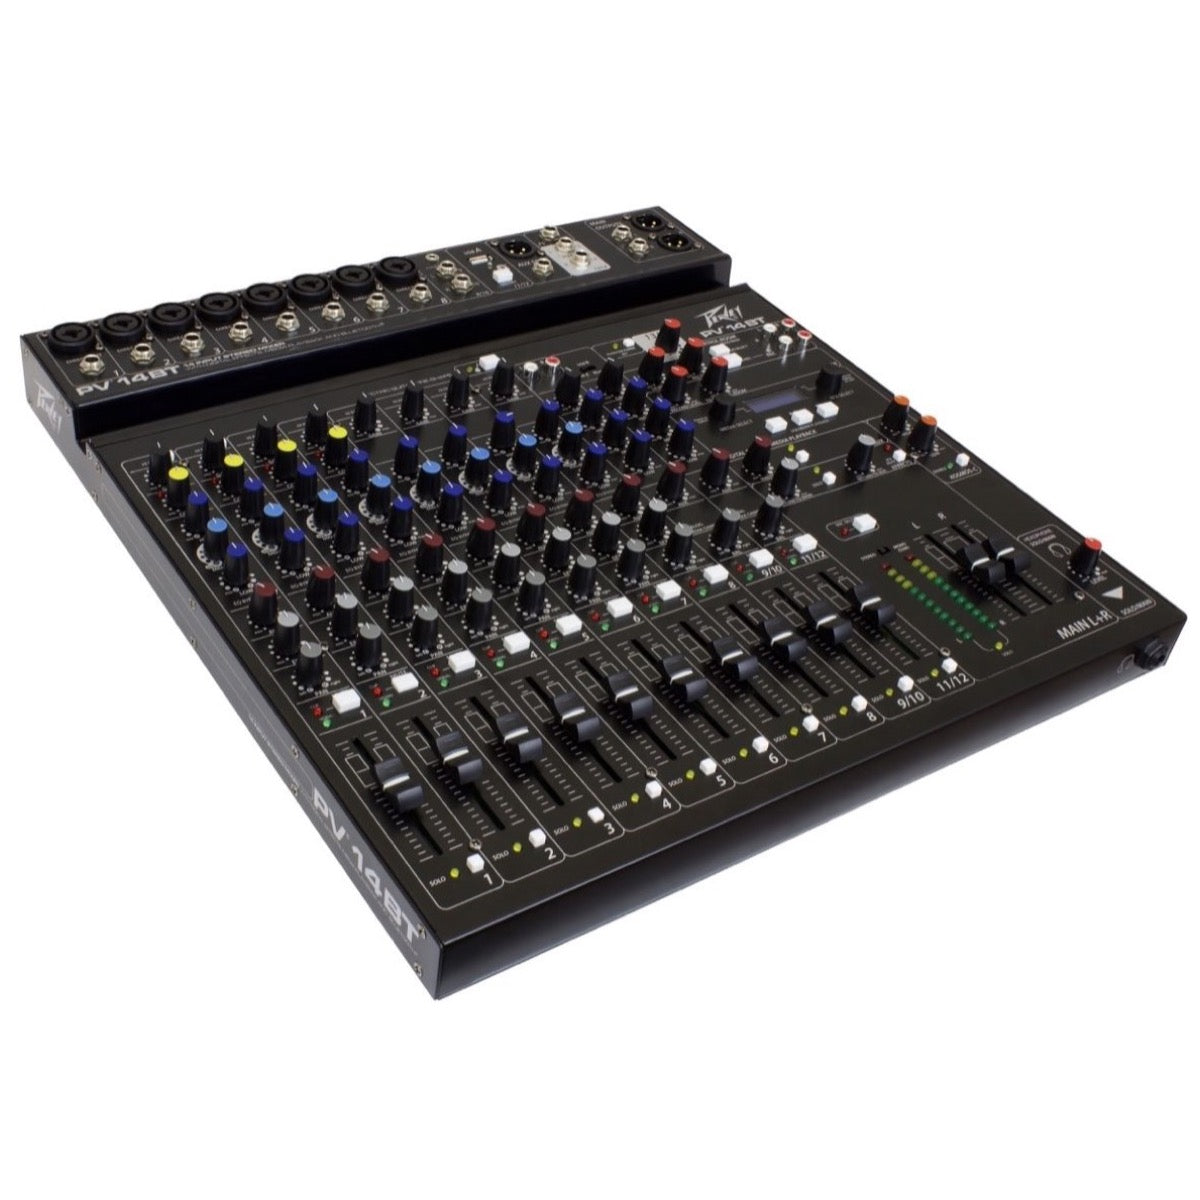 Peavey PV-14BT Stereo Bluetooth Mixer, 14-Channel